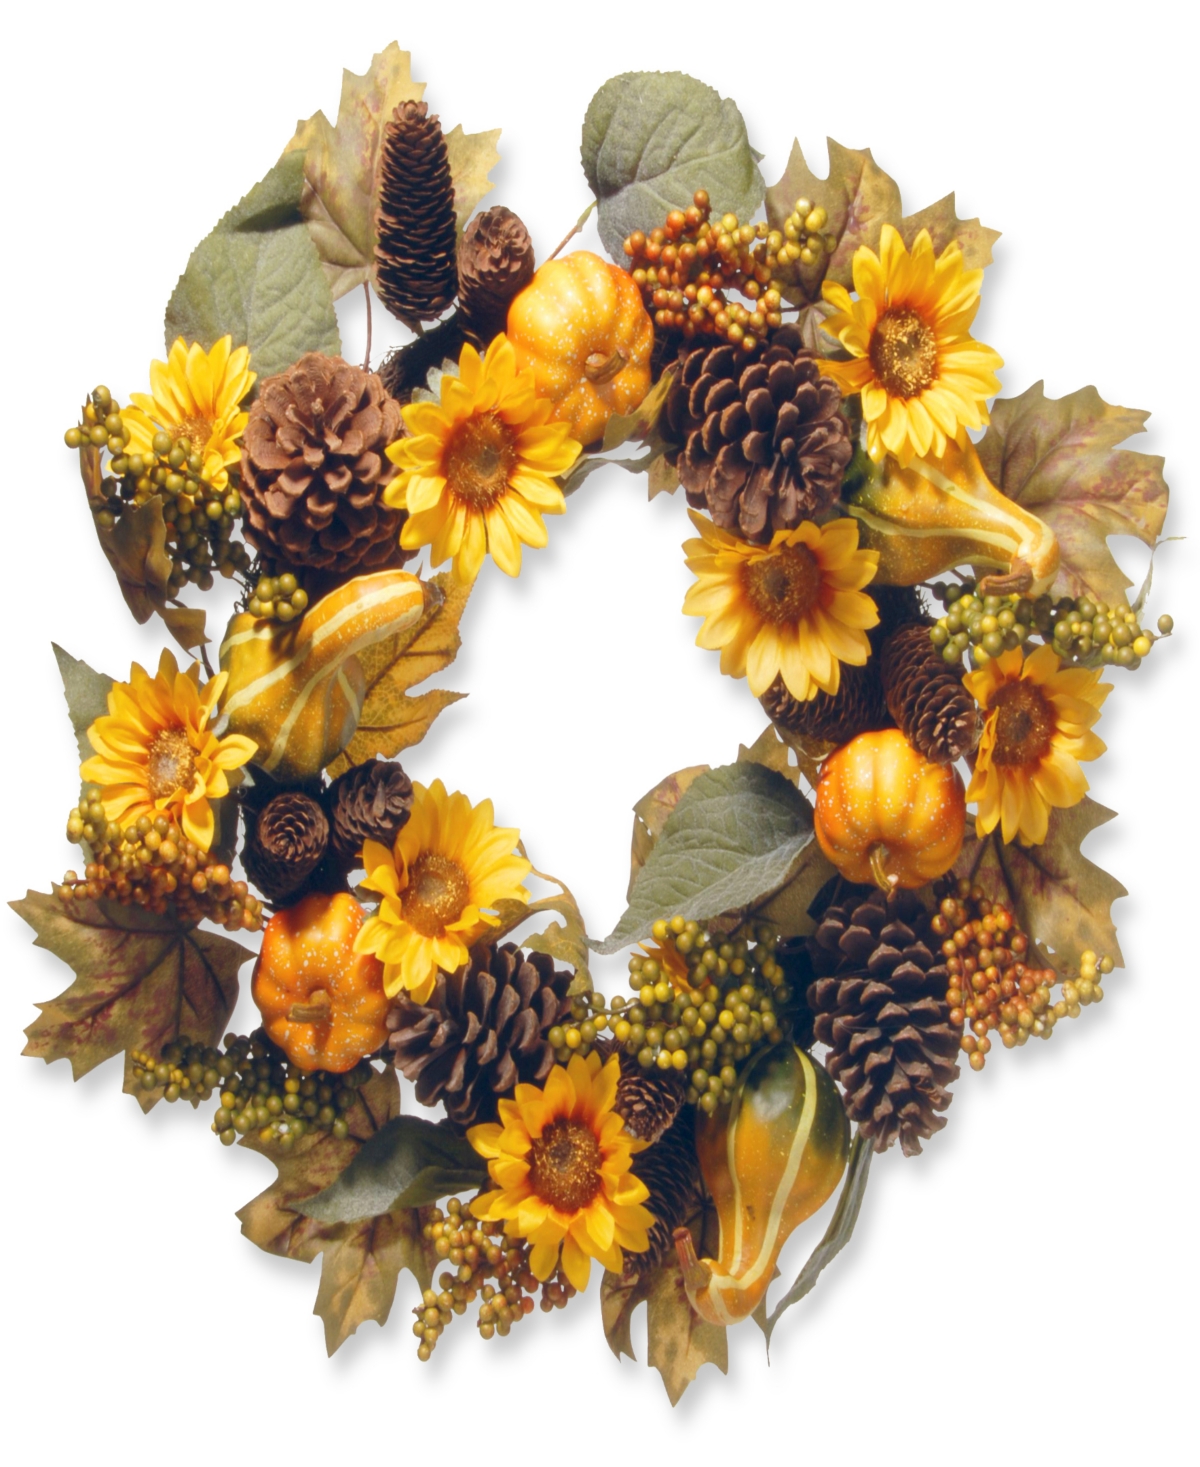 22" Artificial Autumn Wreath, Decorated with Pumpkins, Gourds, Pinecones, Sunflowers, Berry Clusters, Assorted Leaves, Autumn Co